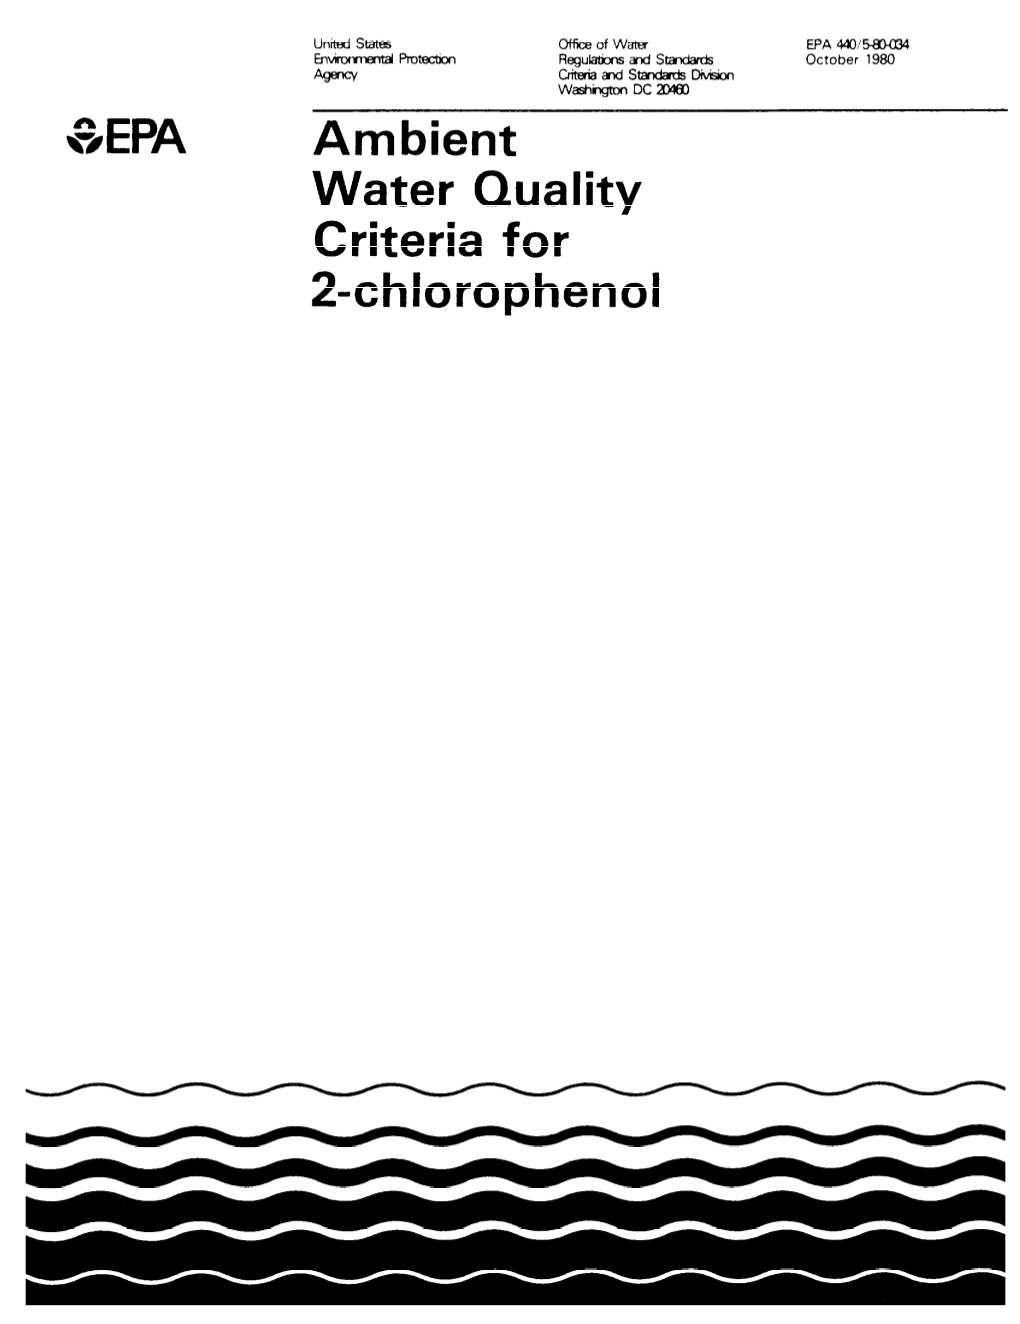 Ambient Water Quality Criteria for 2-Chlorophenol (PDF)